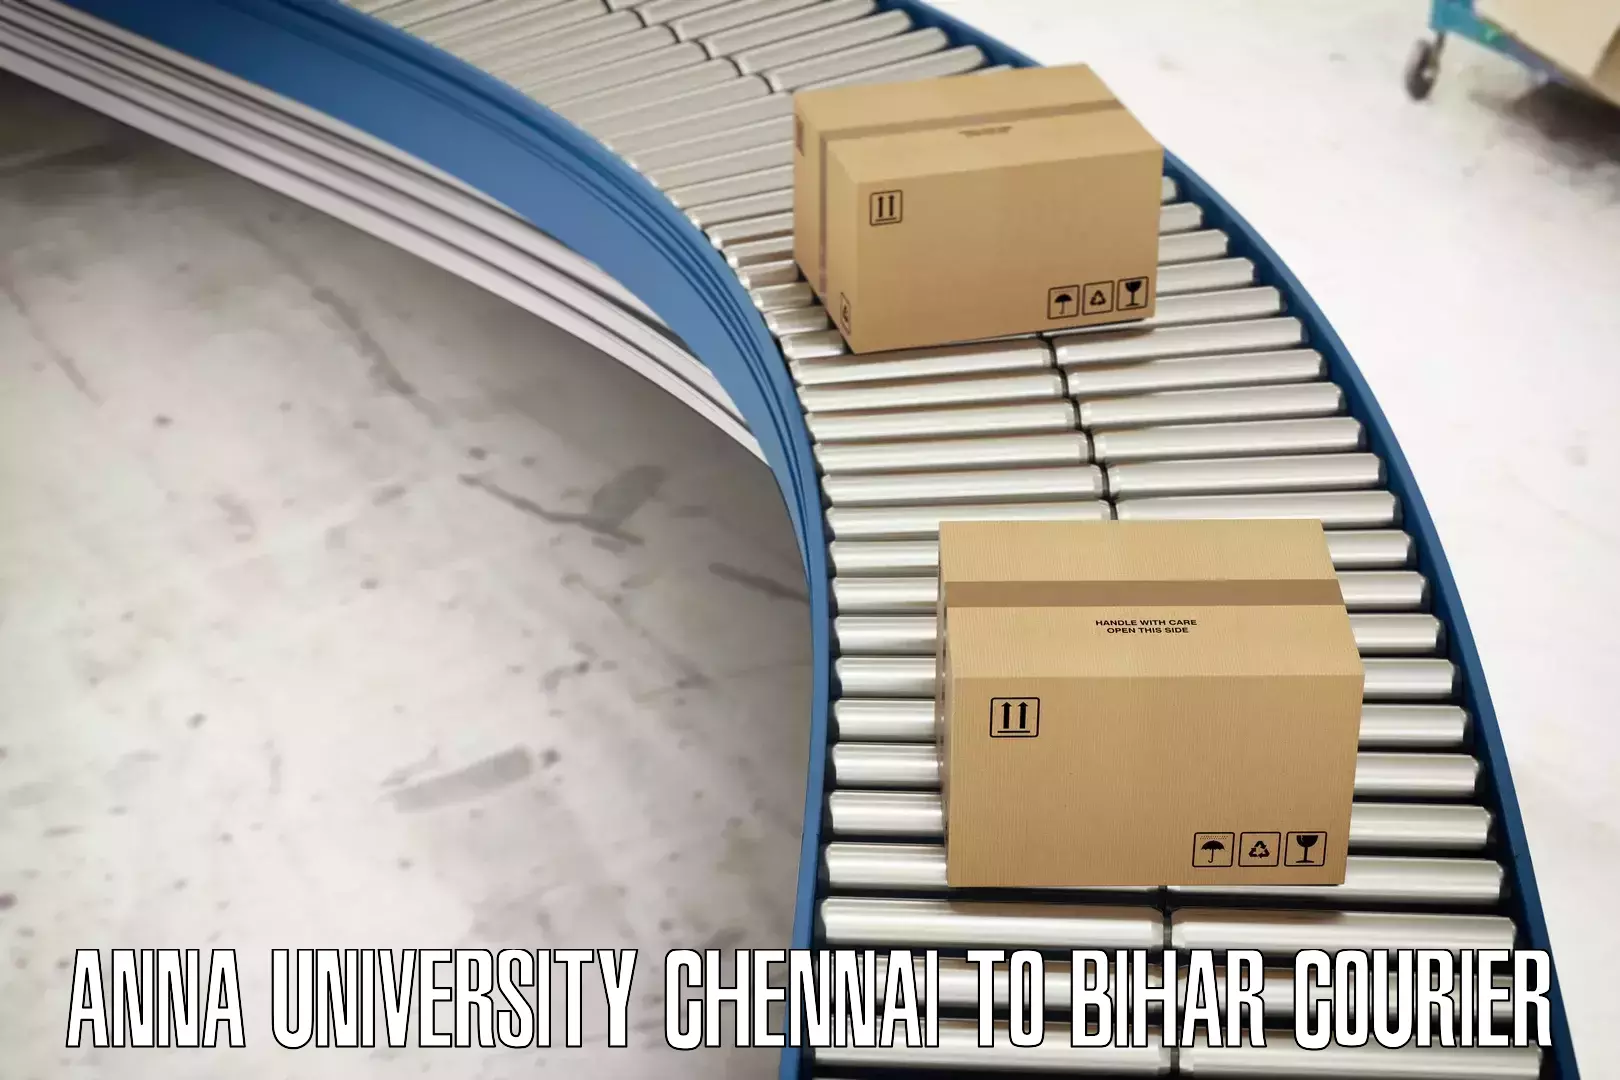 Package tracking in Anna University Chennai to Alamnagar